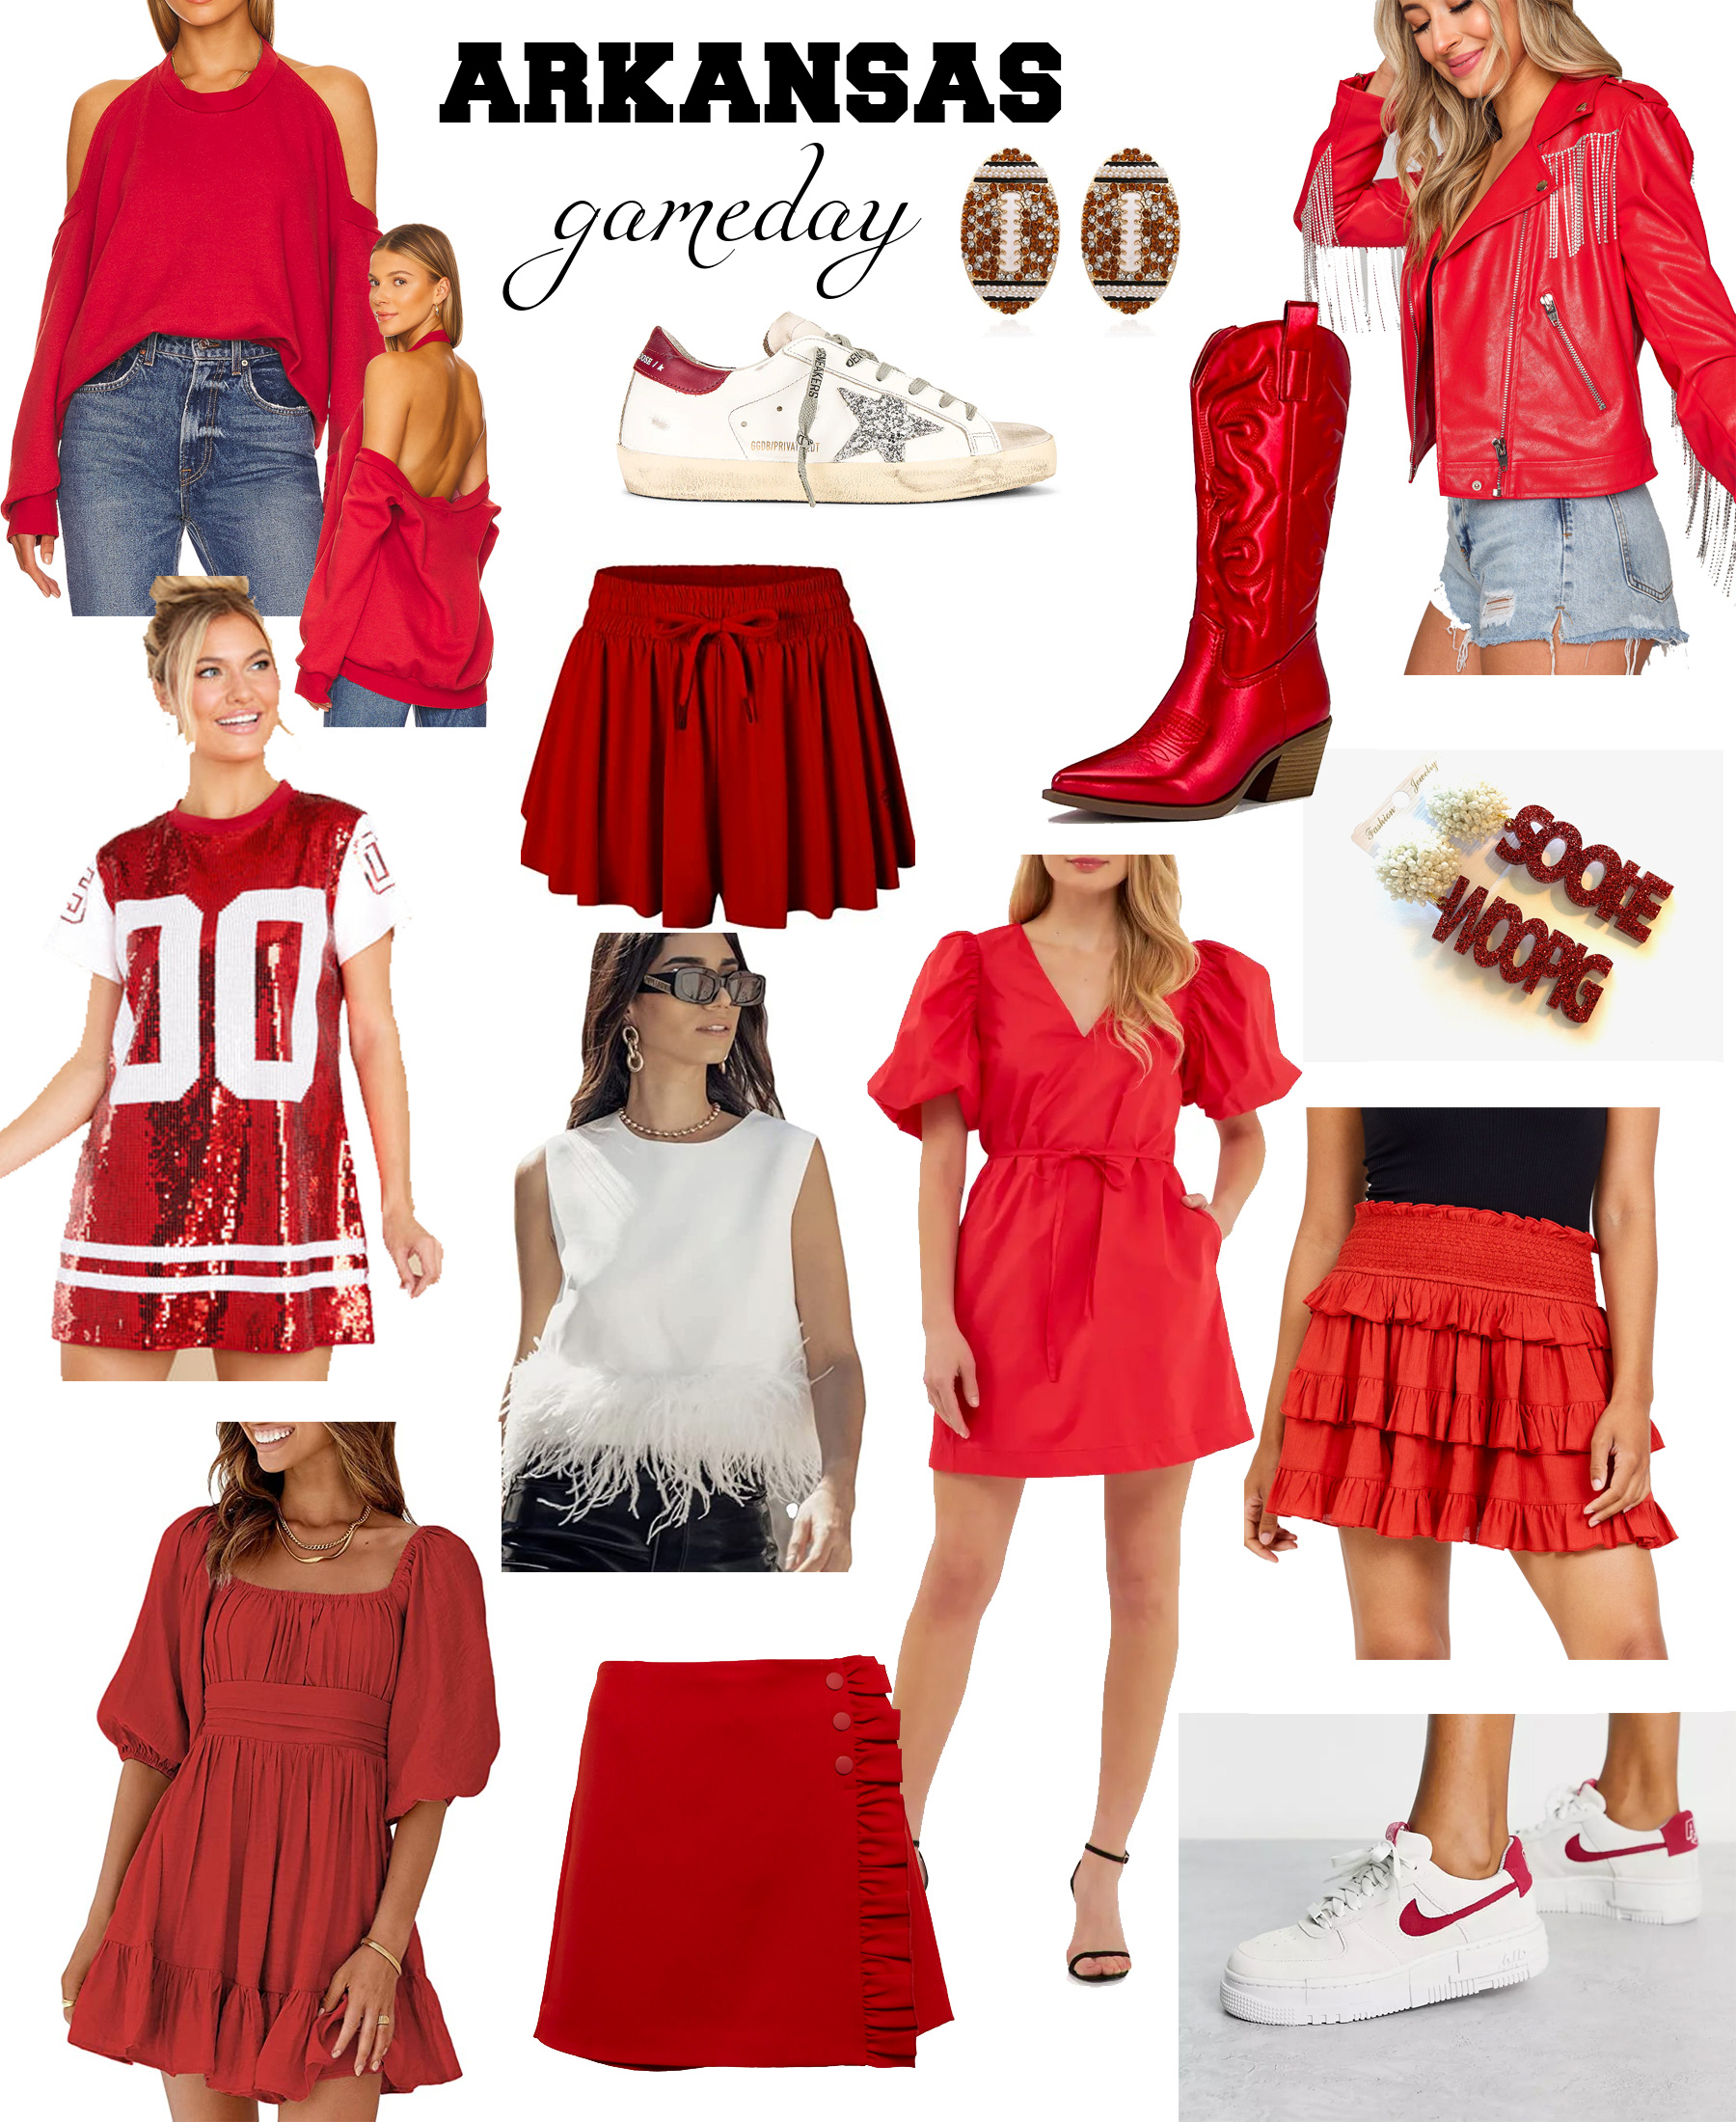 arkansas-gameday-outfits